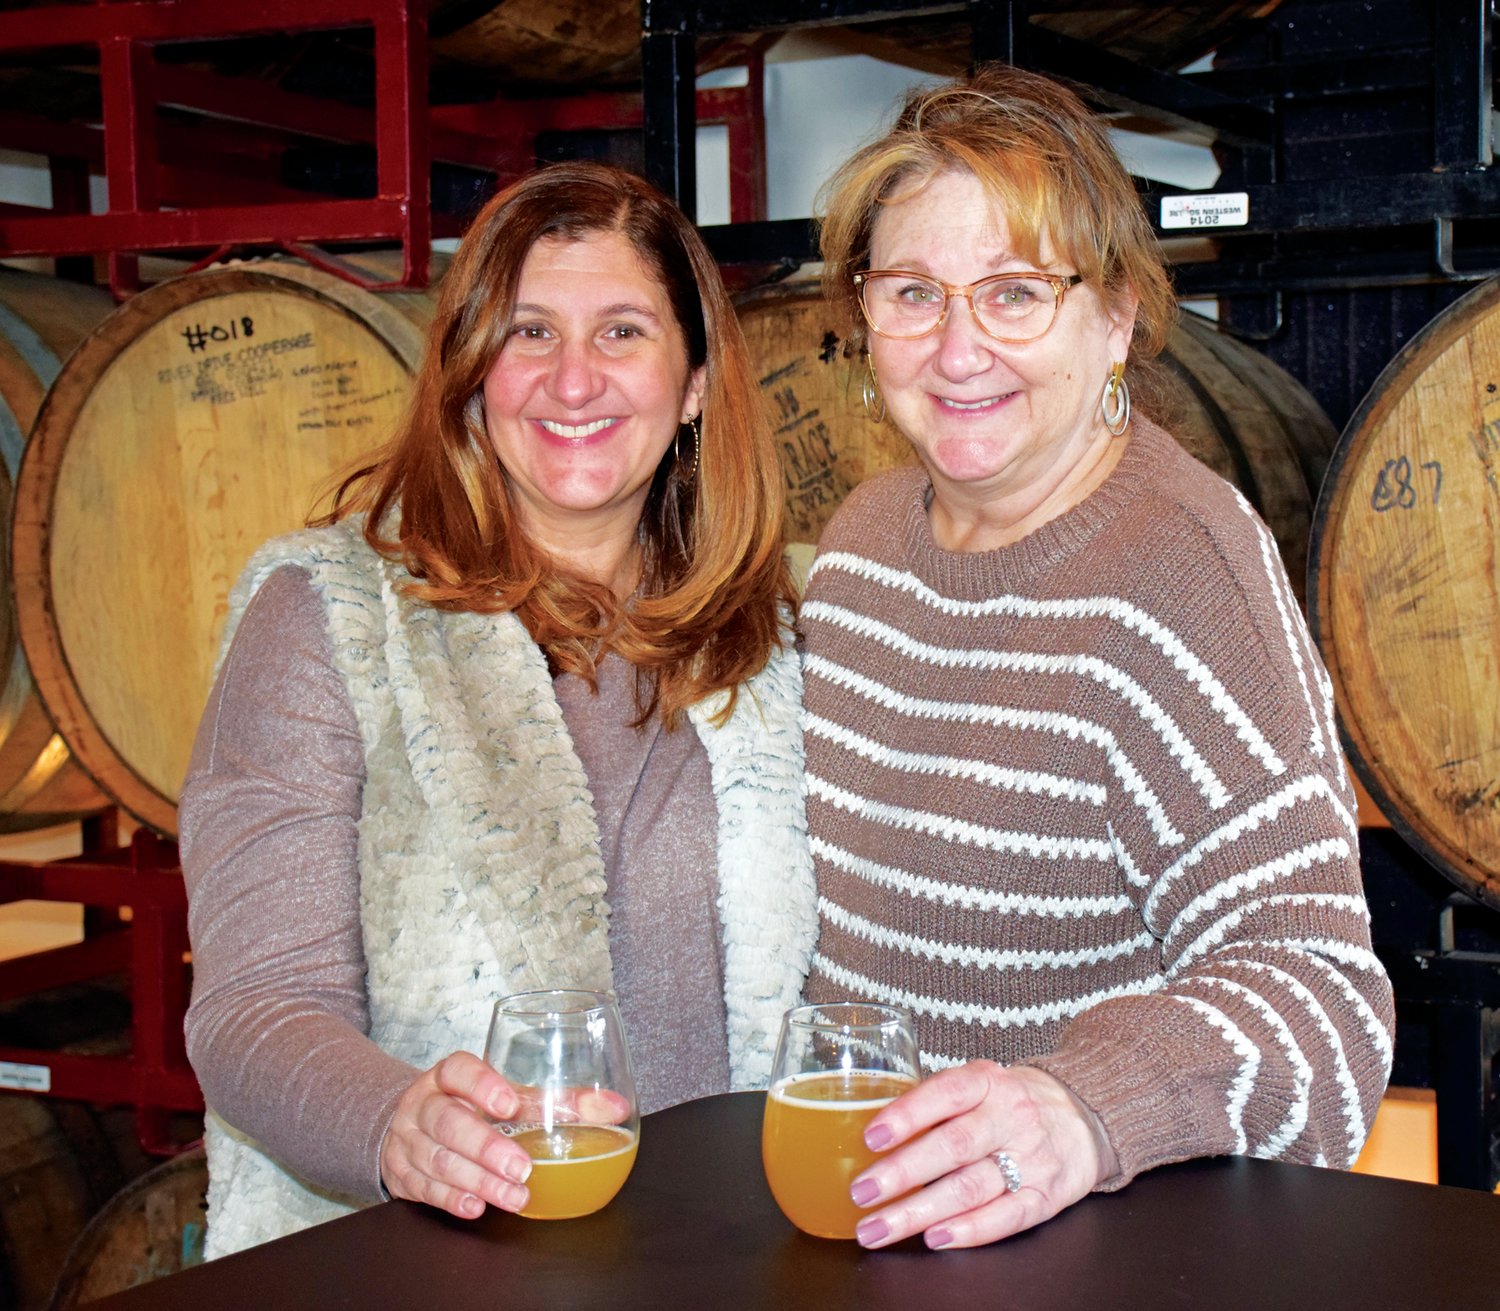 Sisters-in-law Nicole and Lisa Schilling at enjoy drinks at Free Will Brewing Co. on East Walnut Street during the 'Winter Wanderland' celebration in downtown Perkasie on Jan. 28.